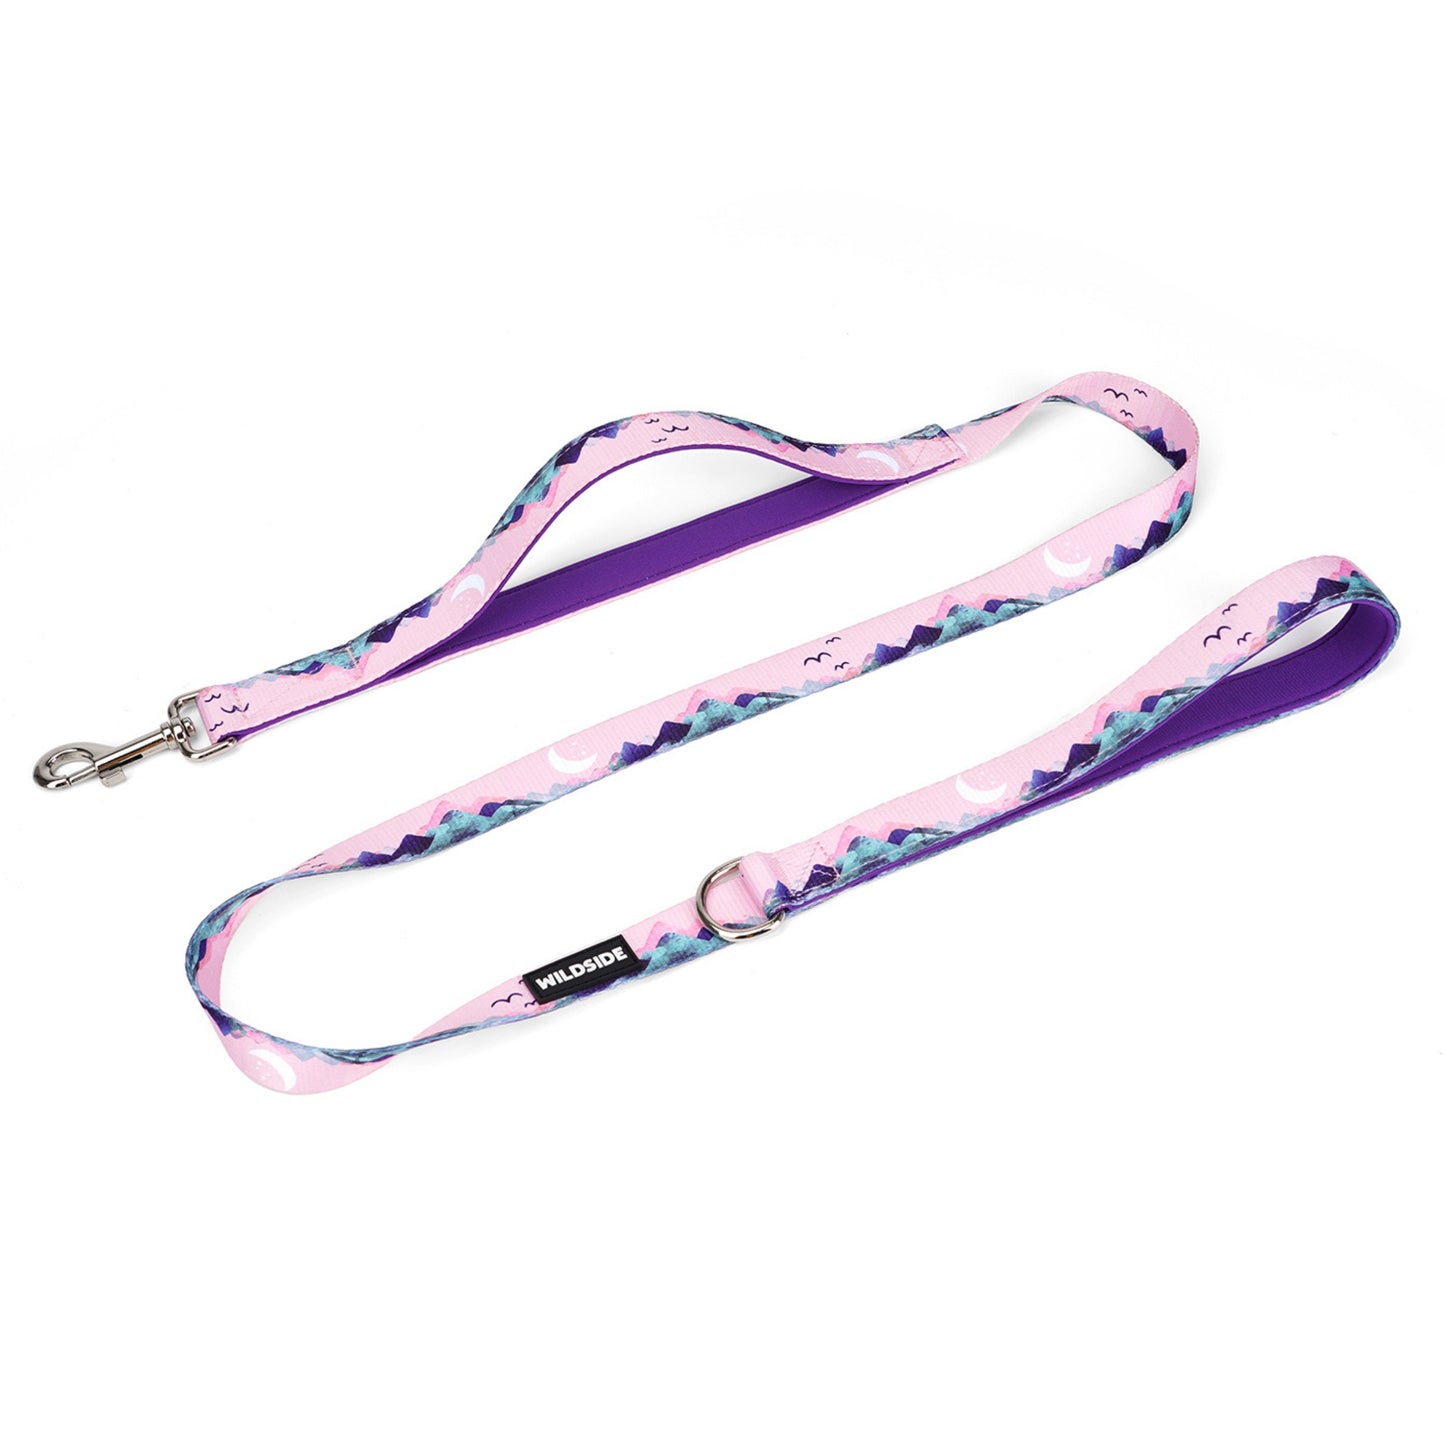 NEW! Mt. Milly Total Control Leash